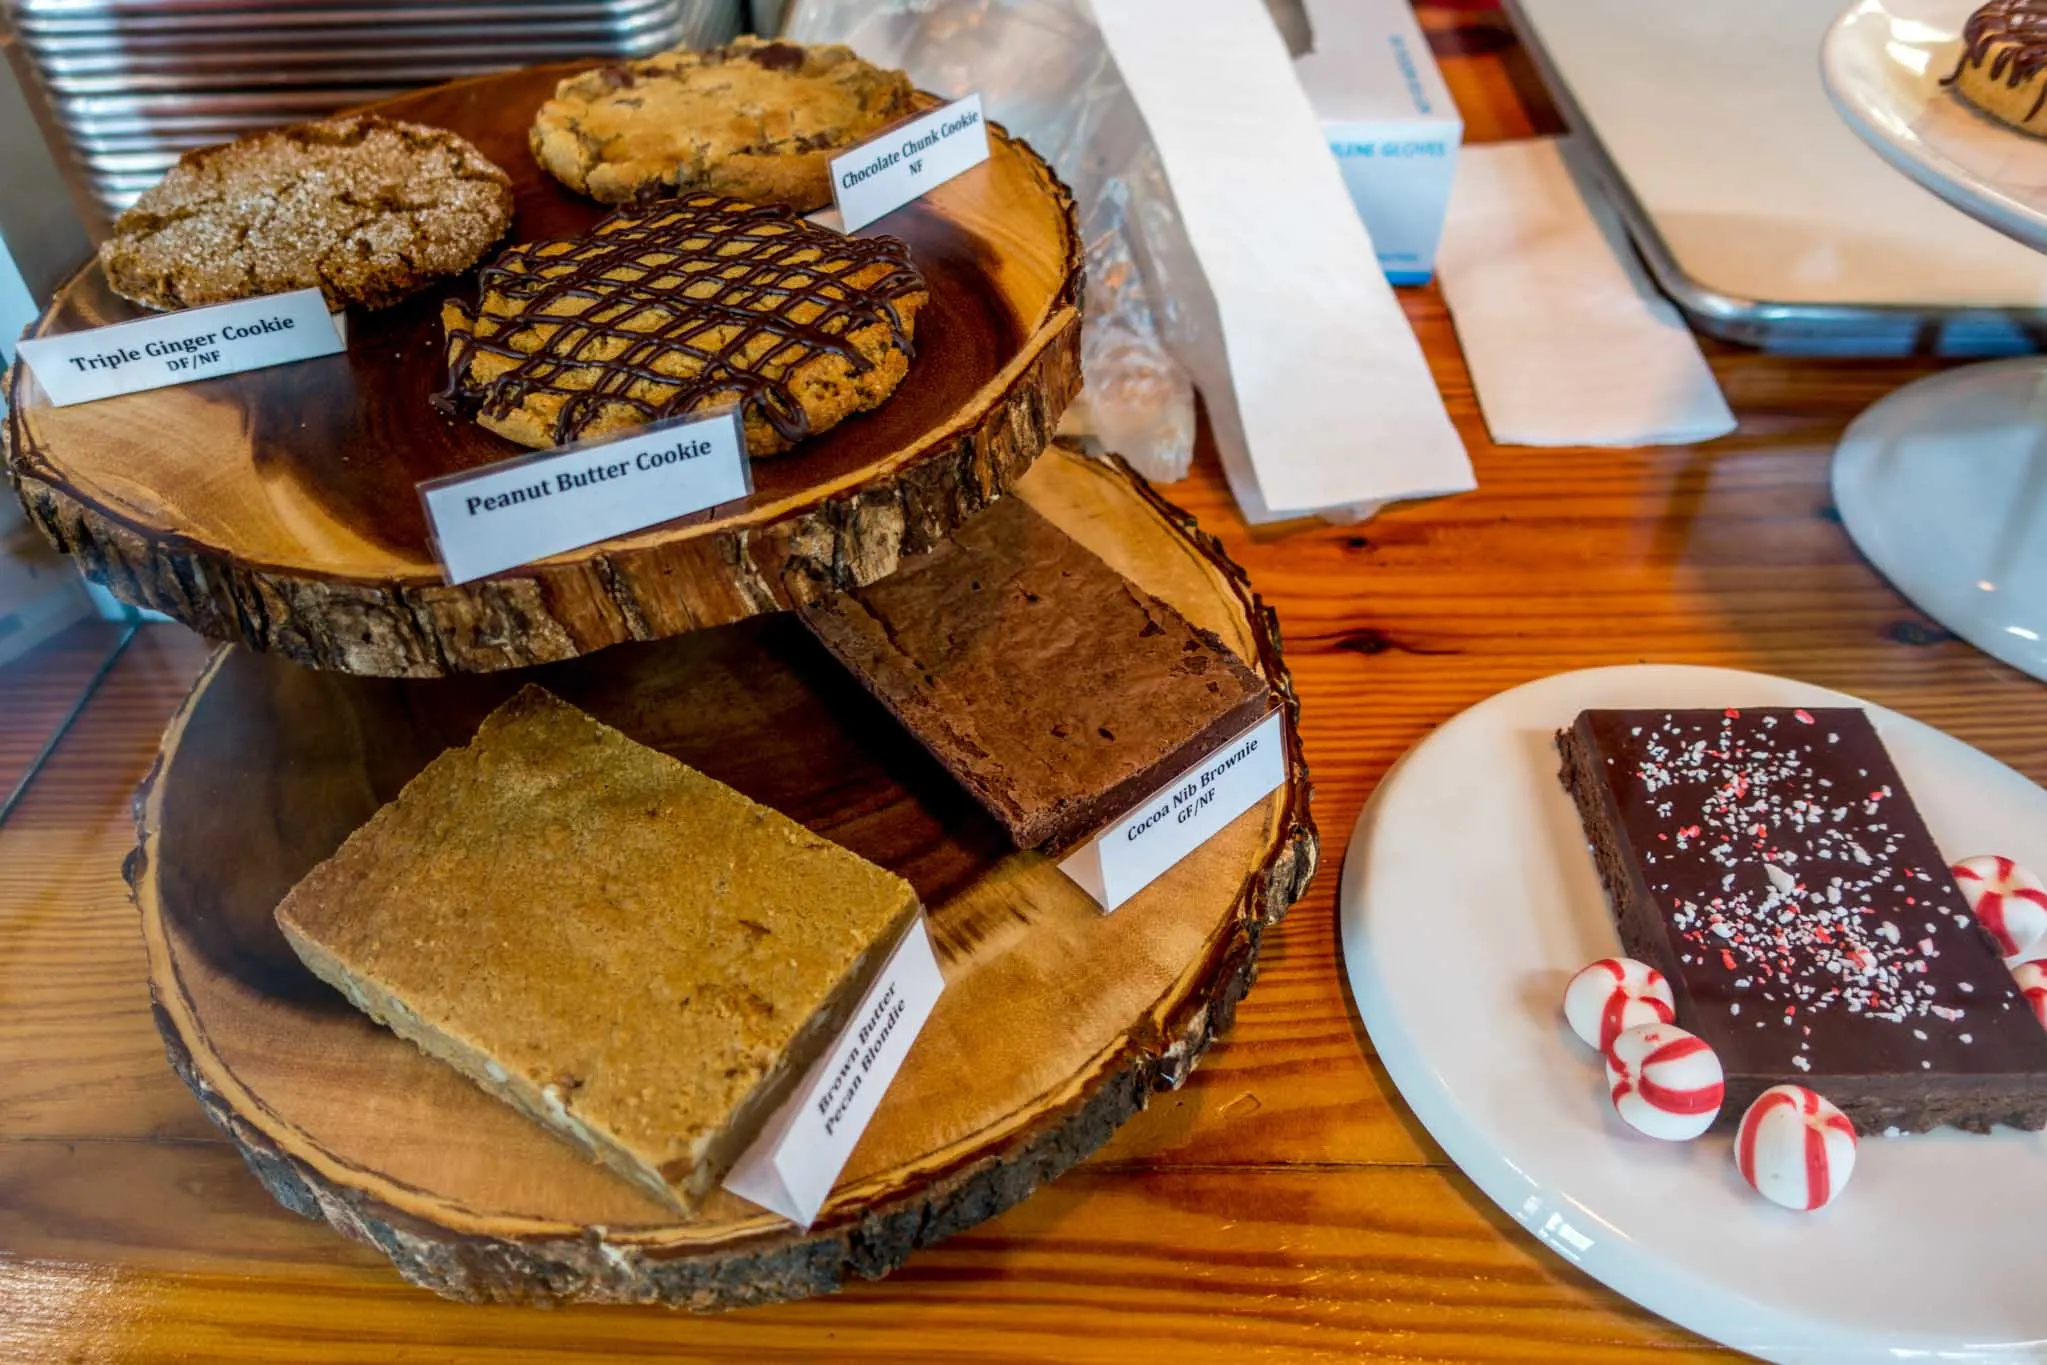 Cookies and brownies for sale at a chocolate store